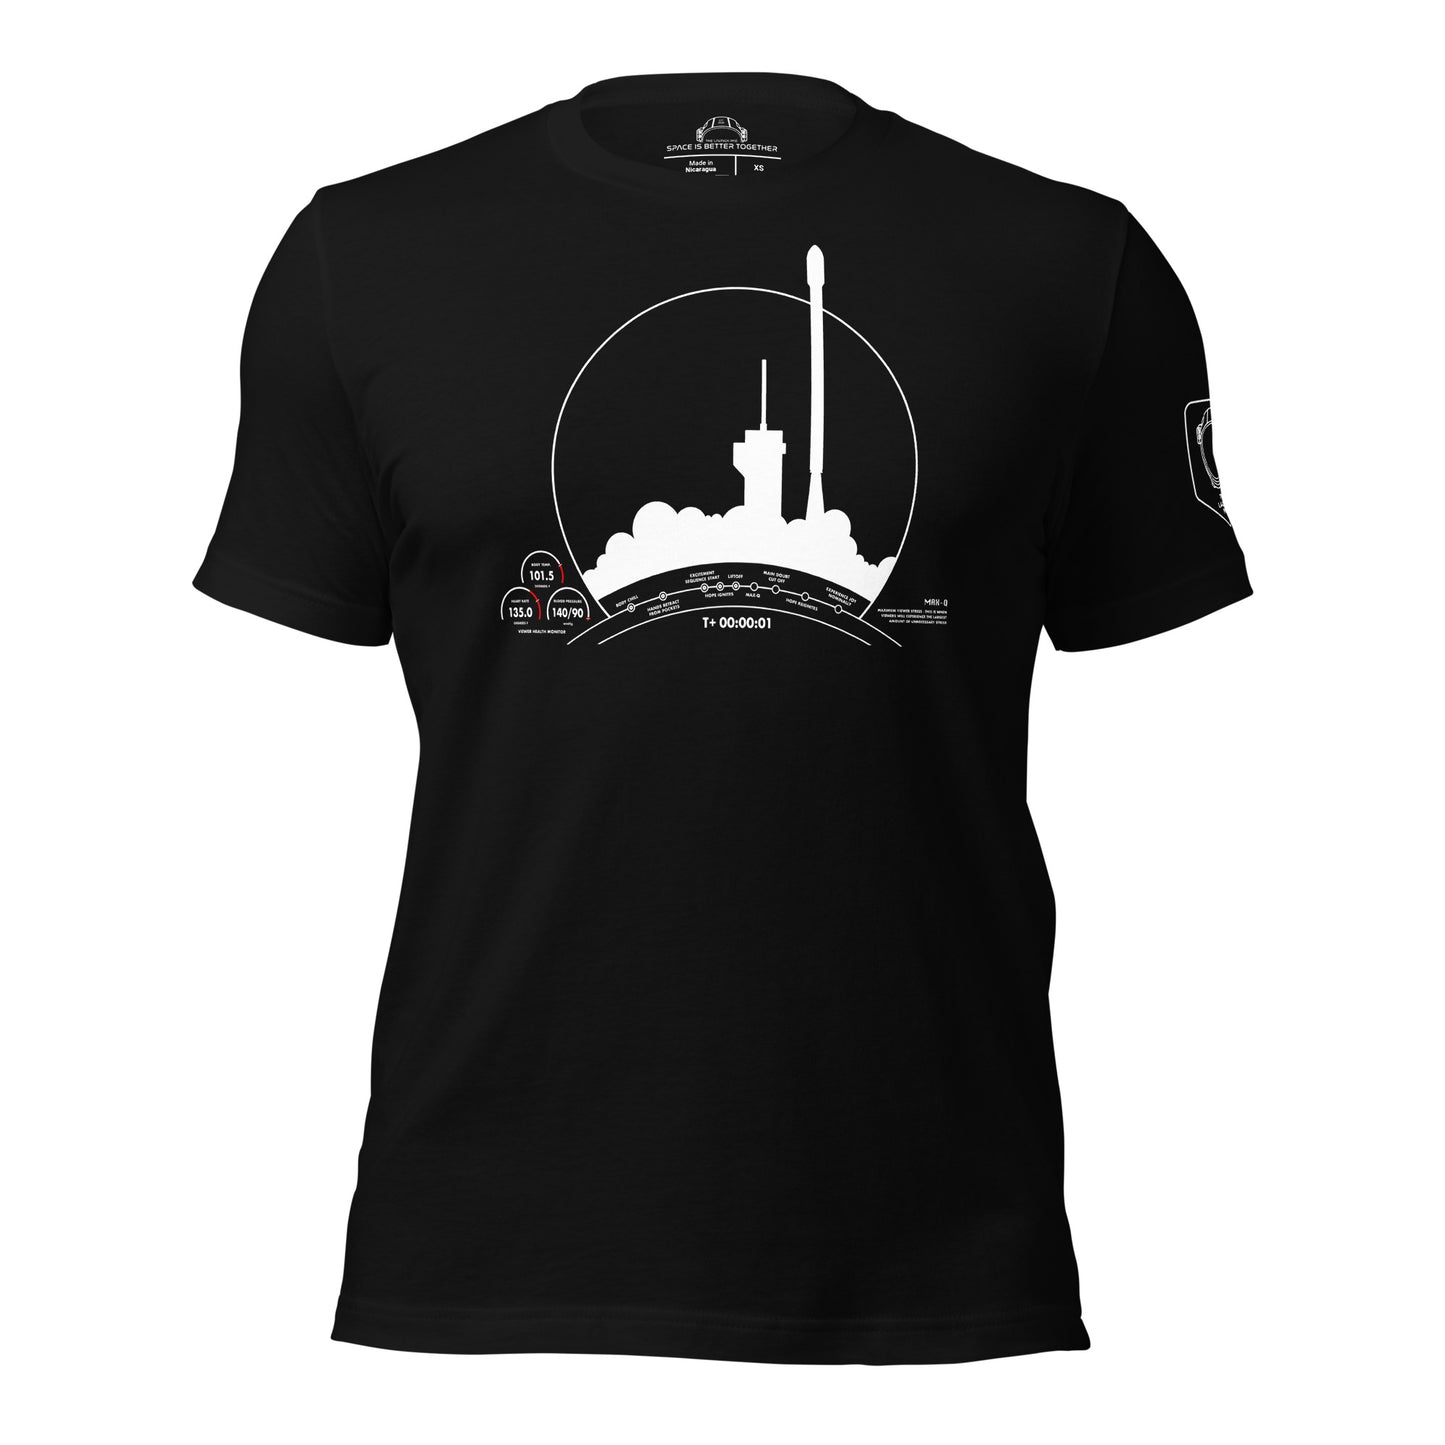 Falcon 9 Launch Experience Tee